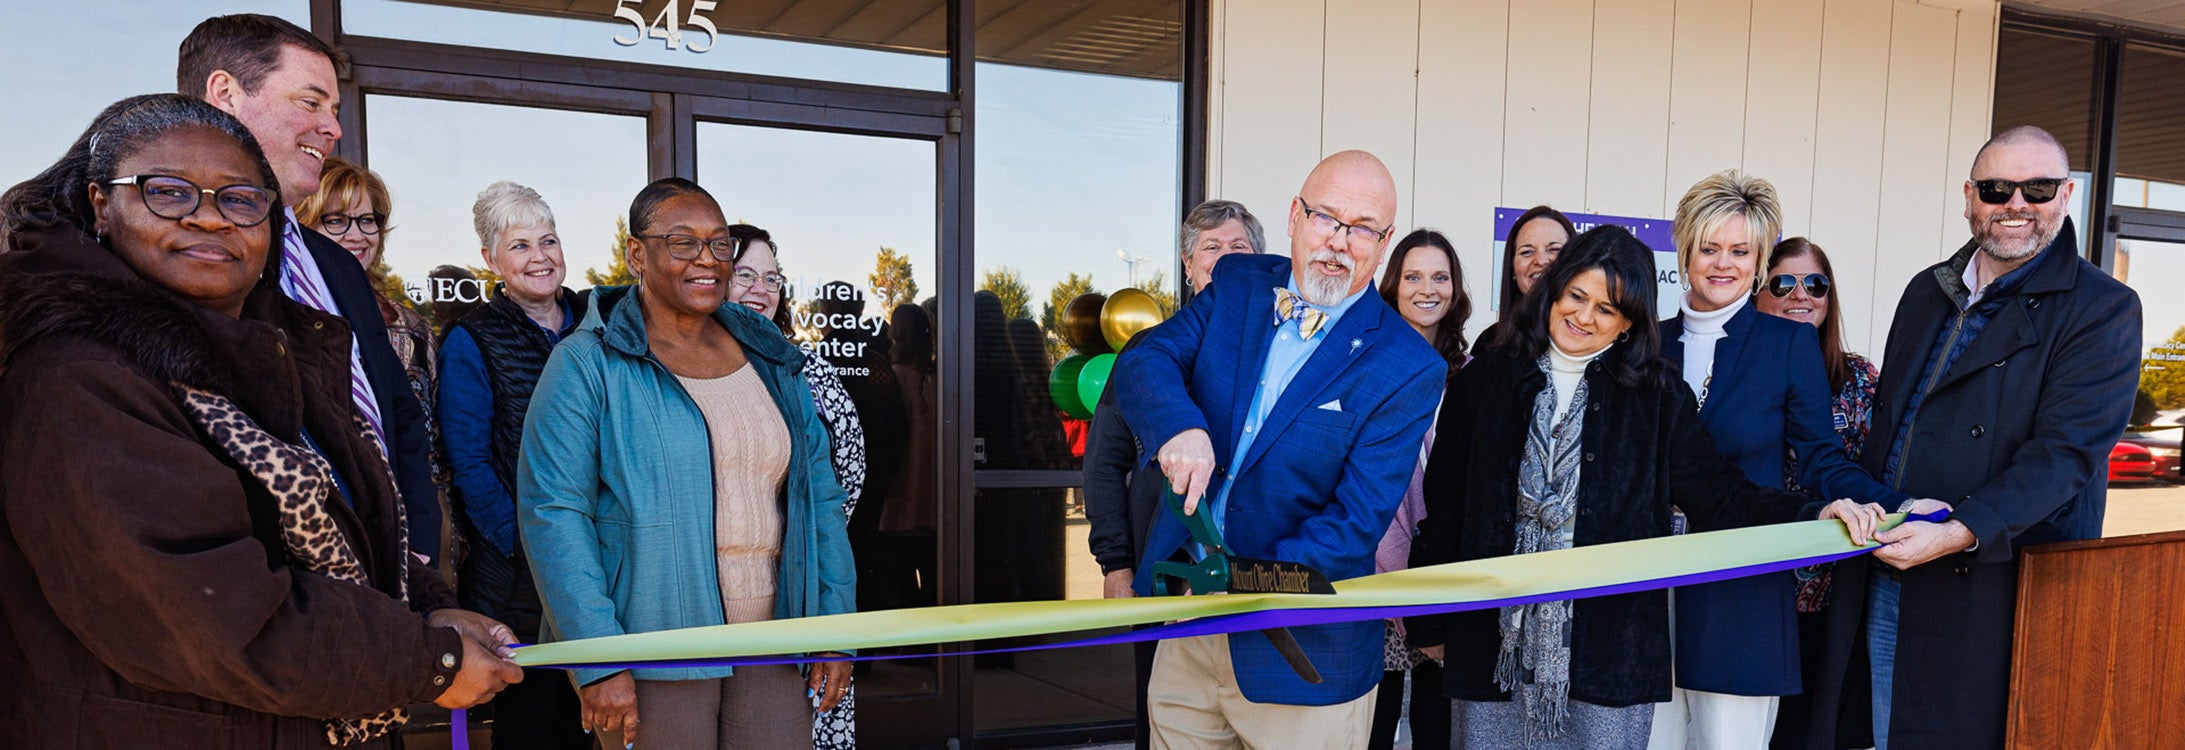 Representatives from ECU, TEDI BEAR Children’s Advocacy Center and the Mount Olive community celebrate the Jan. 27 opening of the Mount Olive Children’s Advocacy Center.